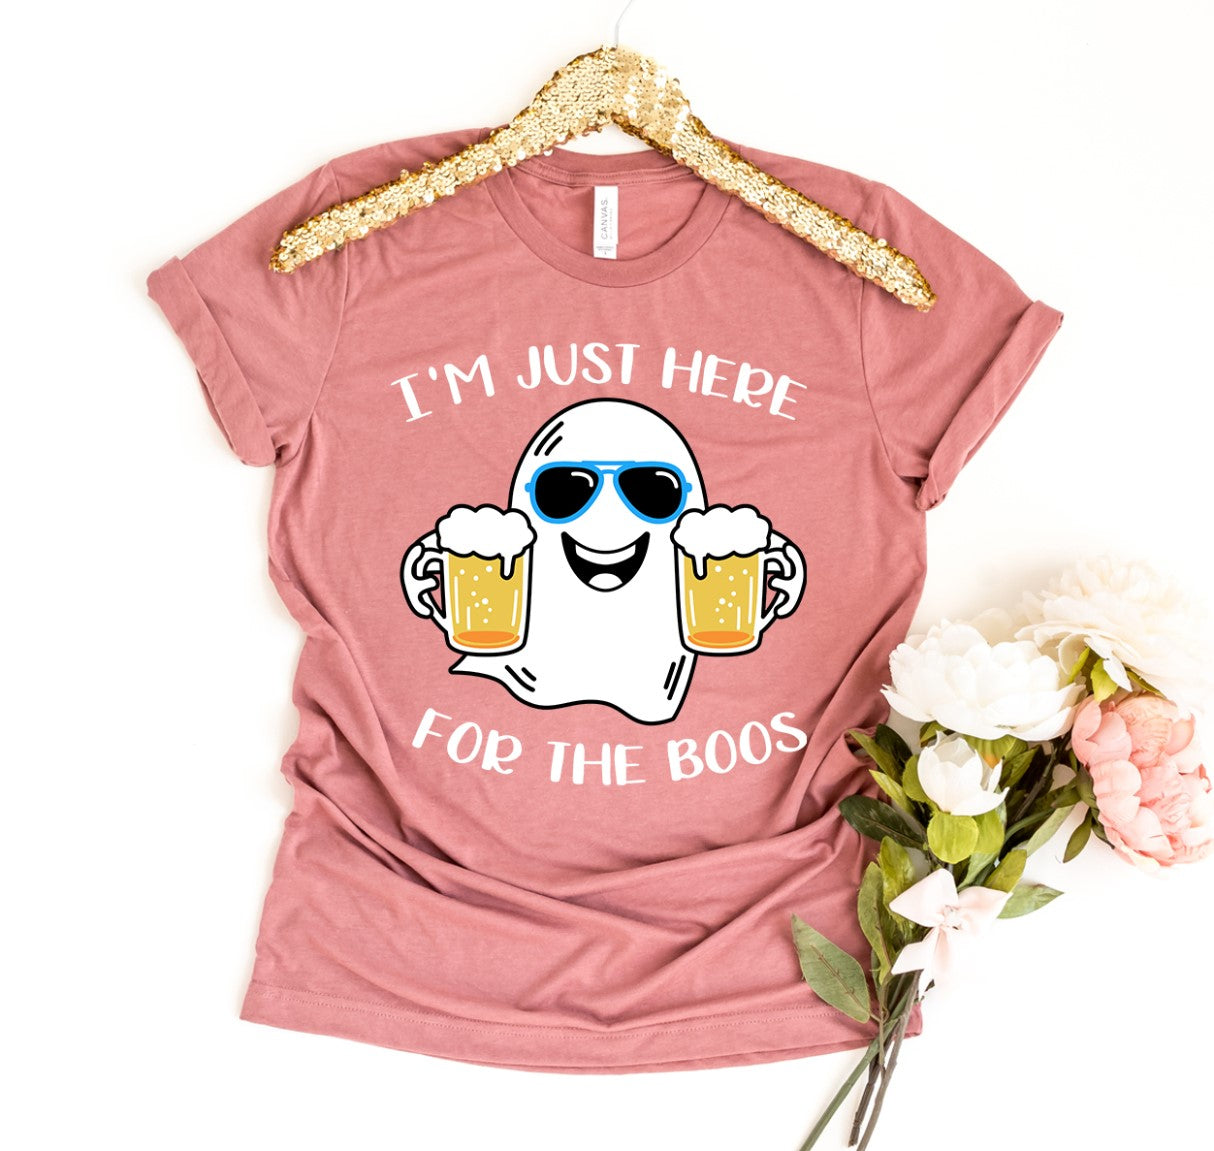 I'm Just Here For The Boos Shirt